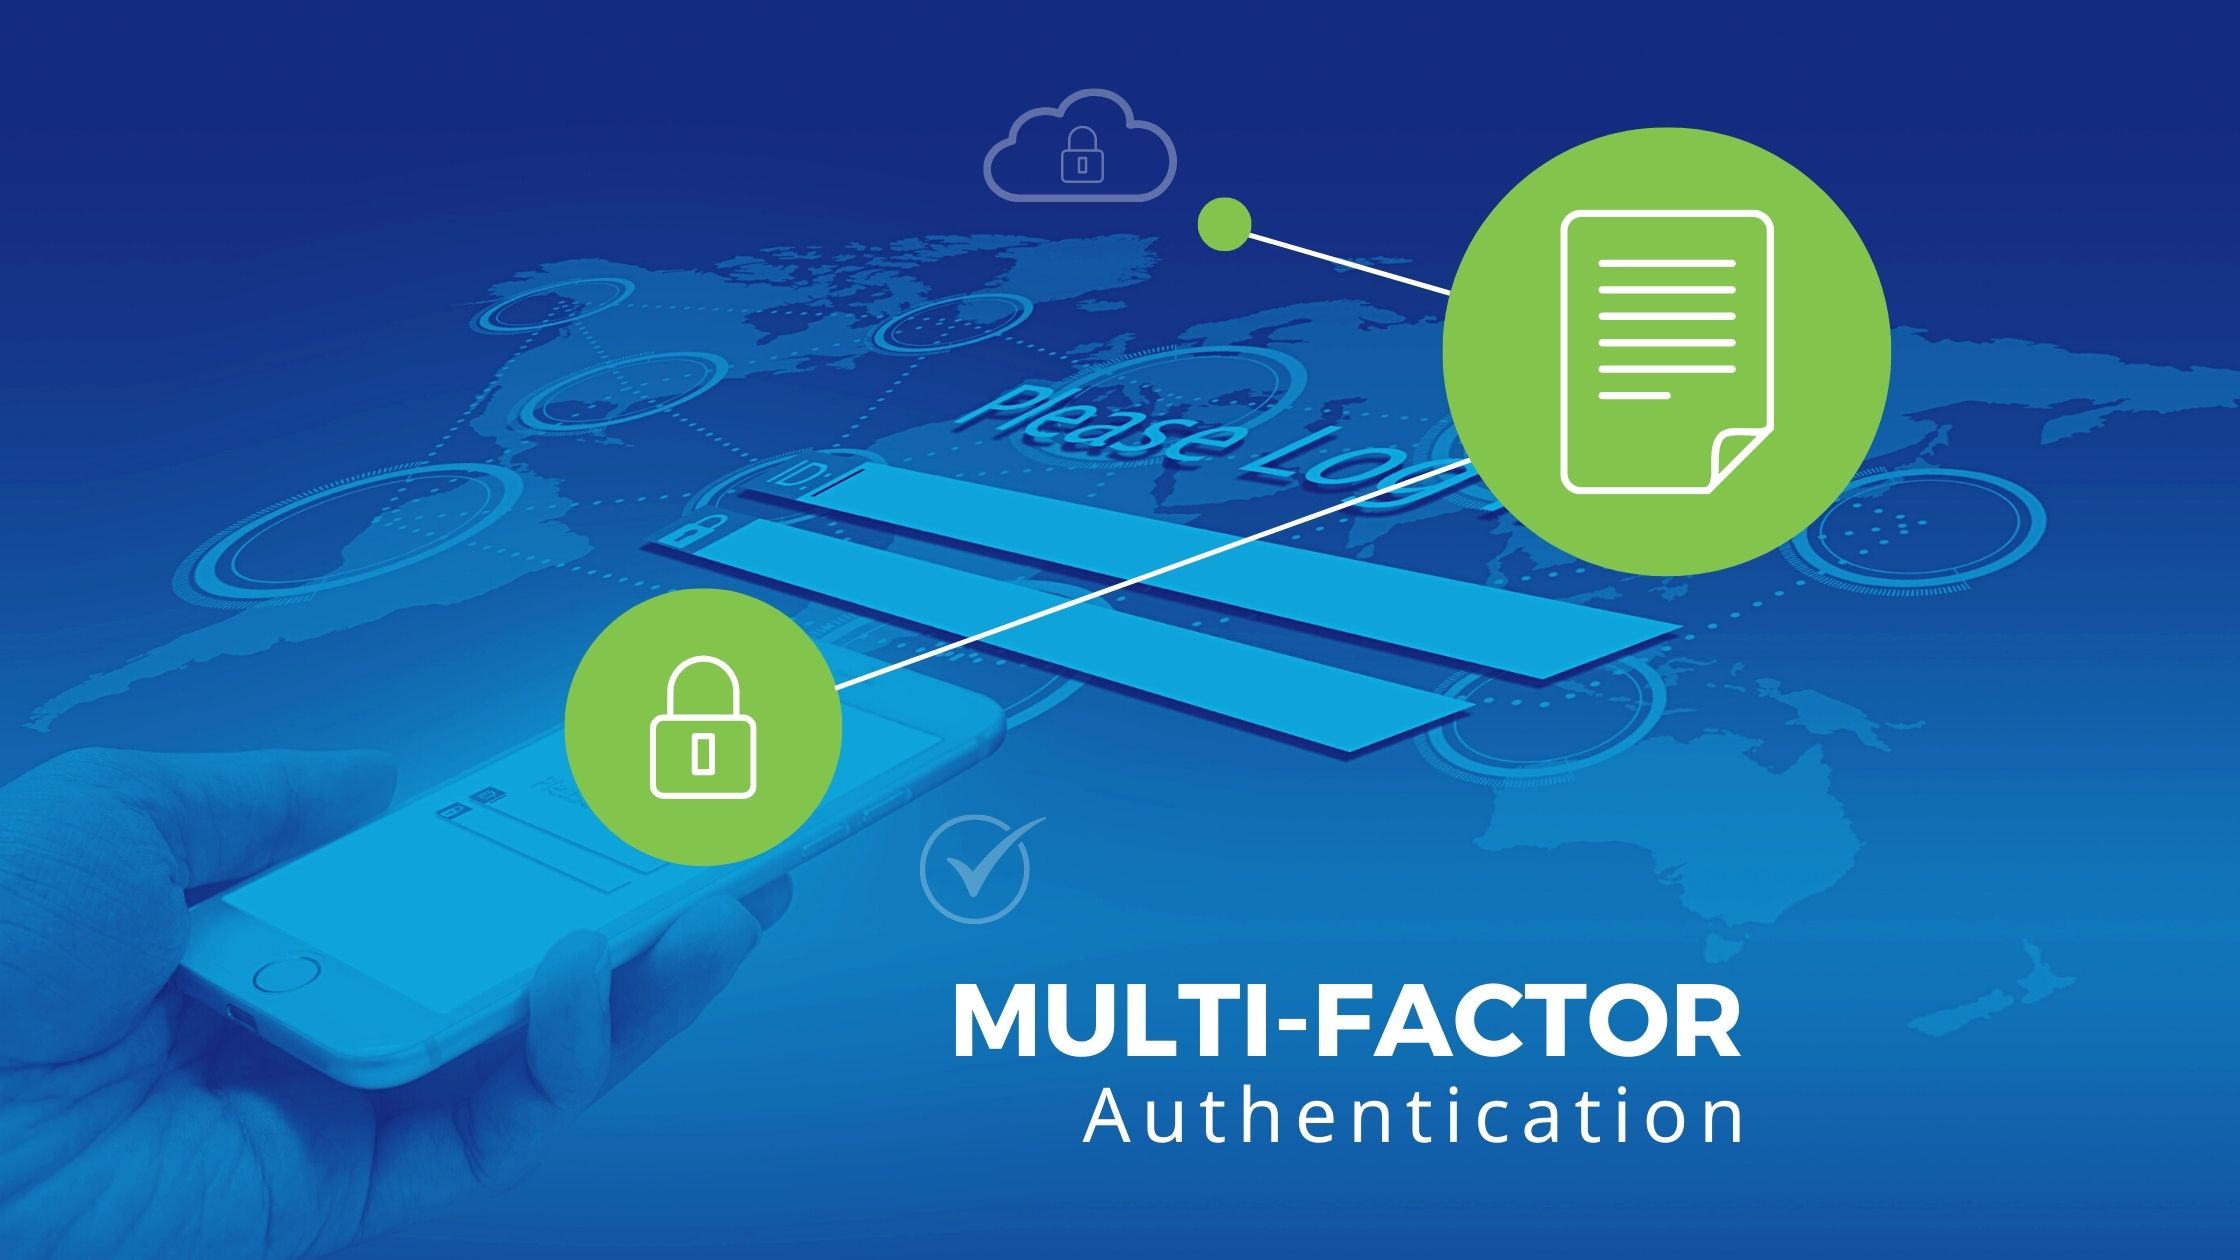 Top 6 Reasons to Use Multi-factor Authentication